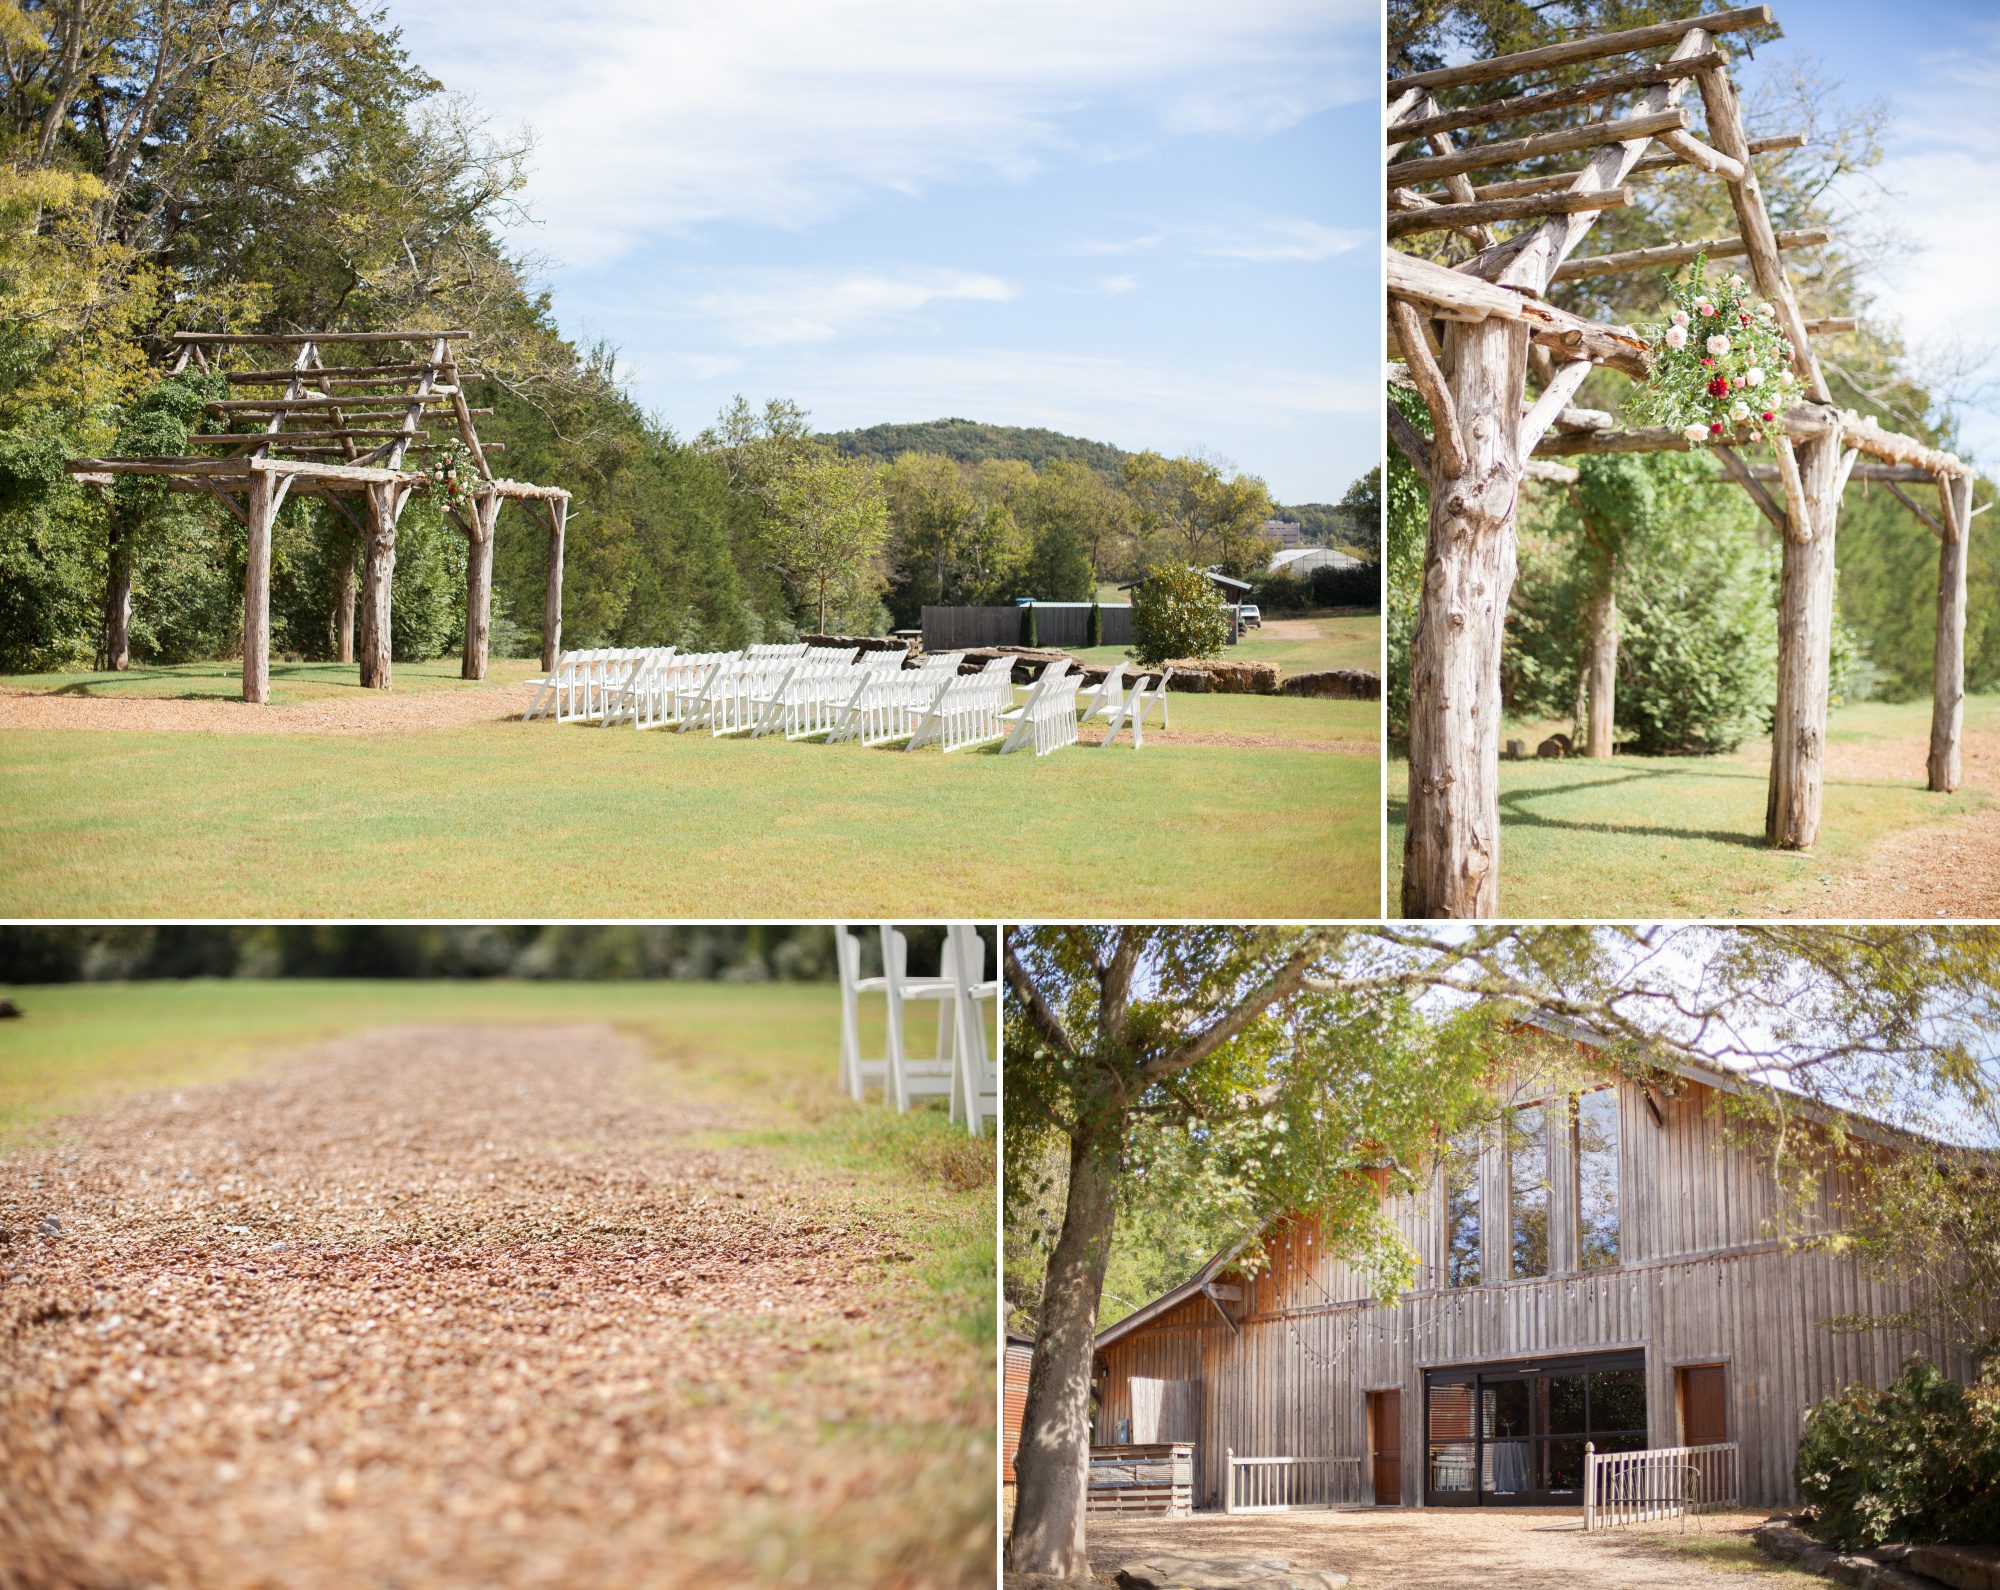 Ceremony and grand barn area photos before wedding ceremony photography at Green Door Gourmet in Nashville, TN